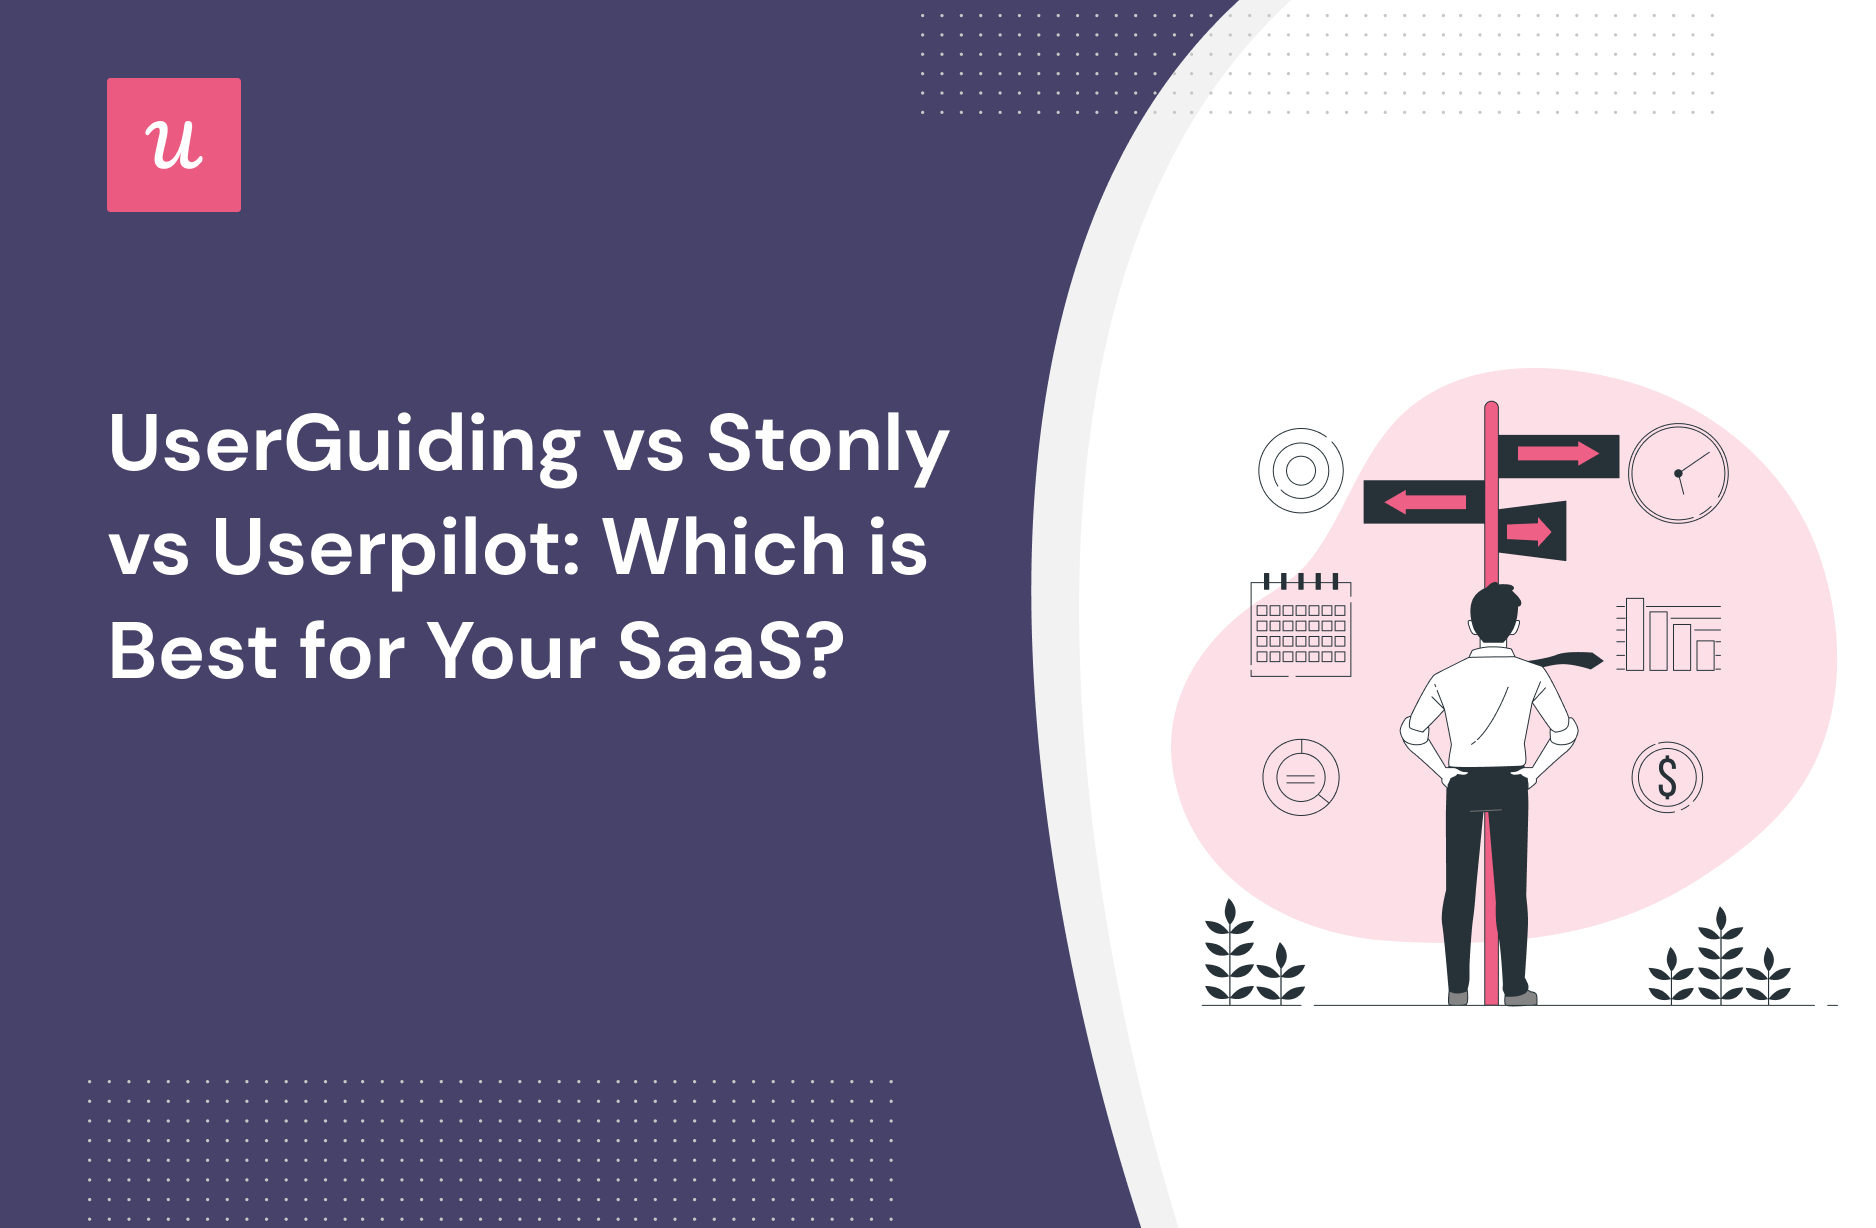 UserGuiding vs Stonly vs Userpilot: Which is Best for Your SaaS?